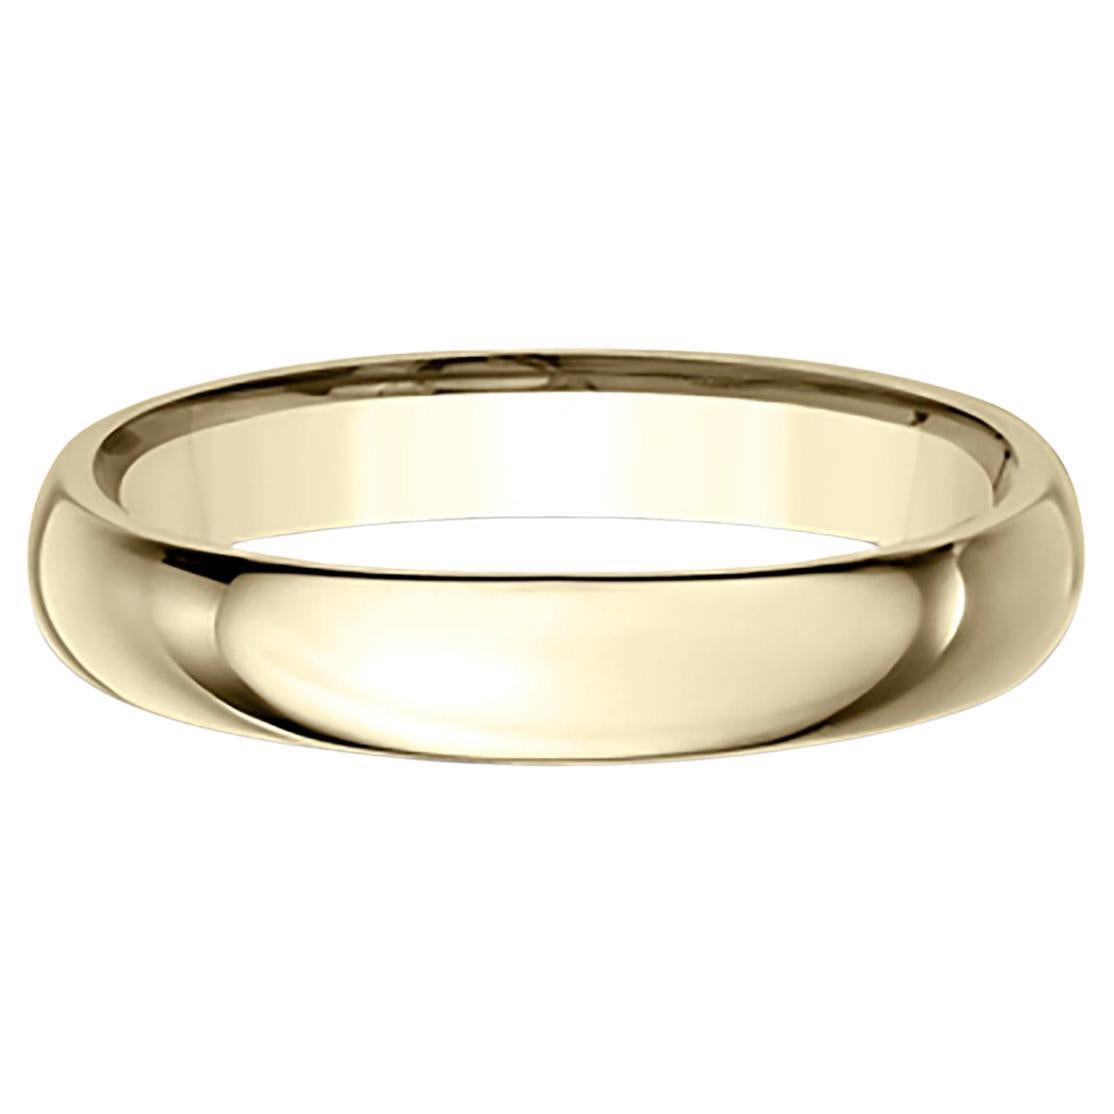 Benchmark Classic Comfort Fit Wedding Band in 14K Yellow Gold, Width 4mm For Sale